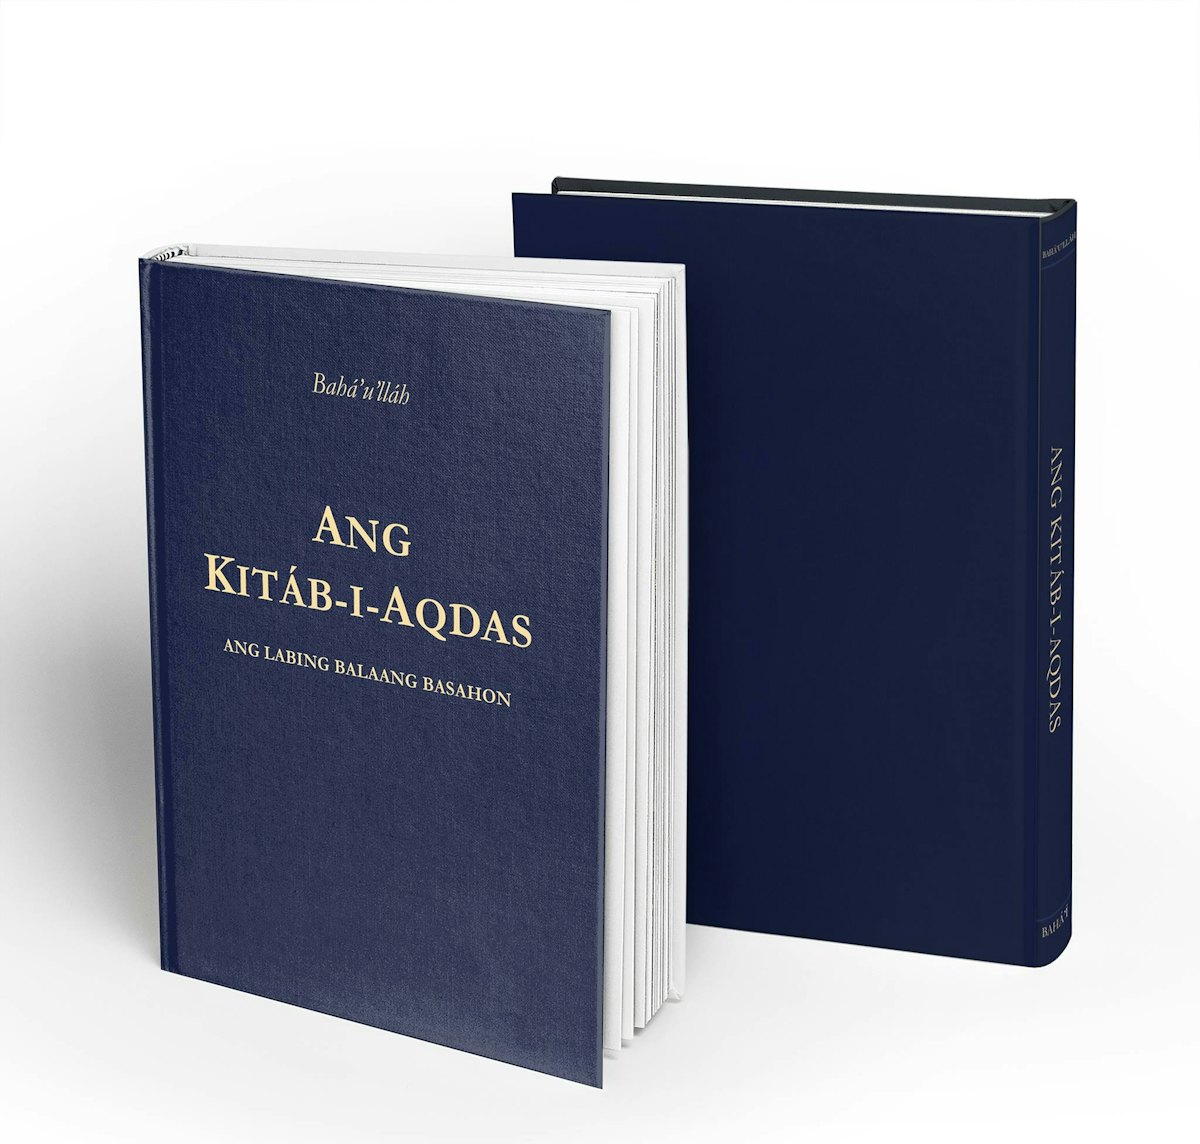 A translation of the Kitab-i-Aqdas in Cebuano, the second-most widely spread native language in the Philippines, was published last month.